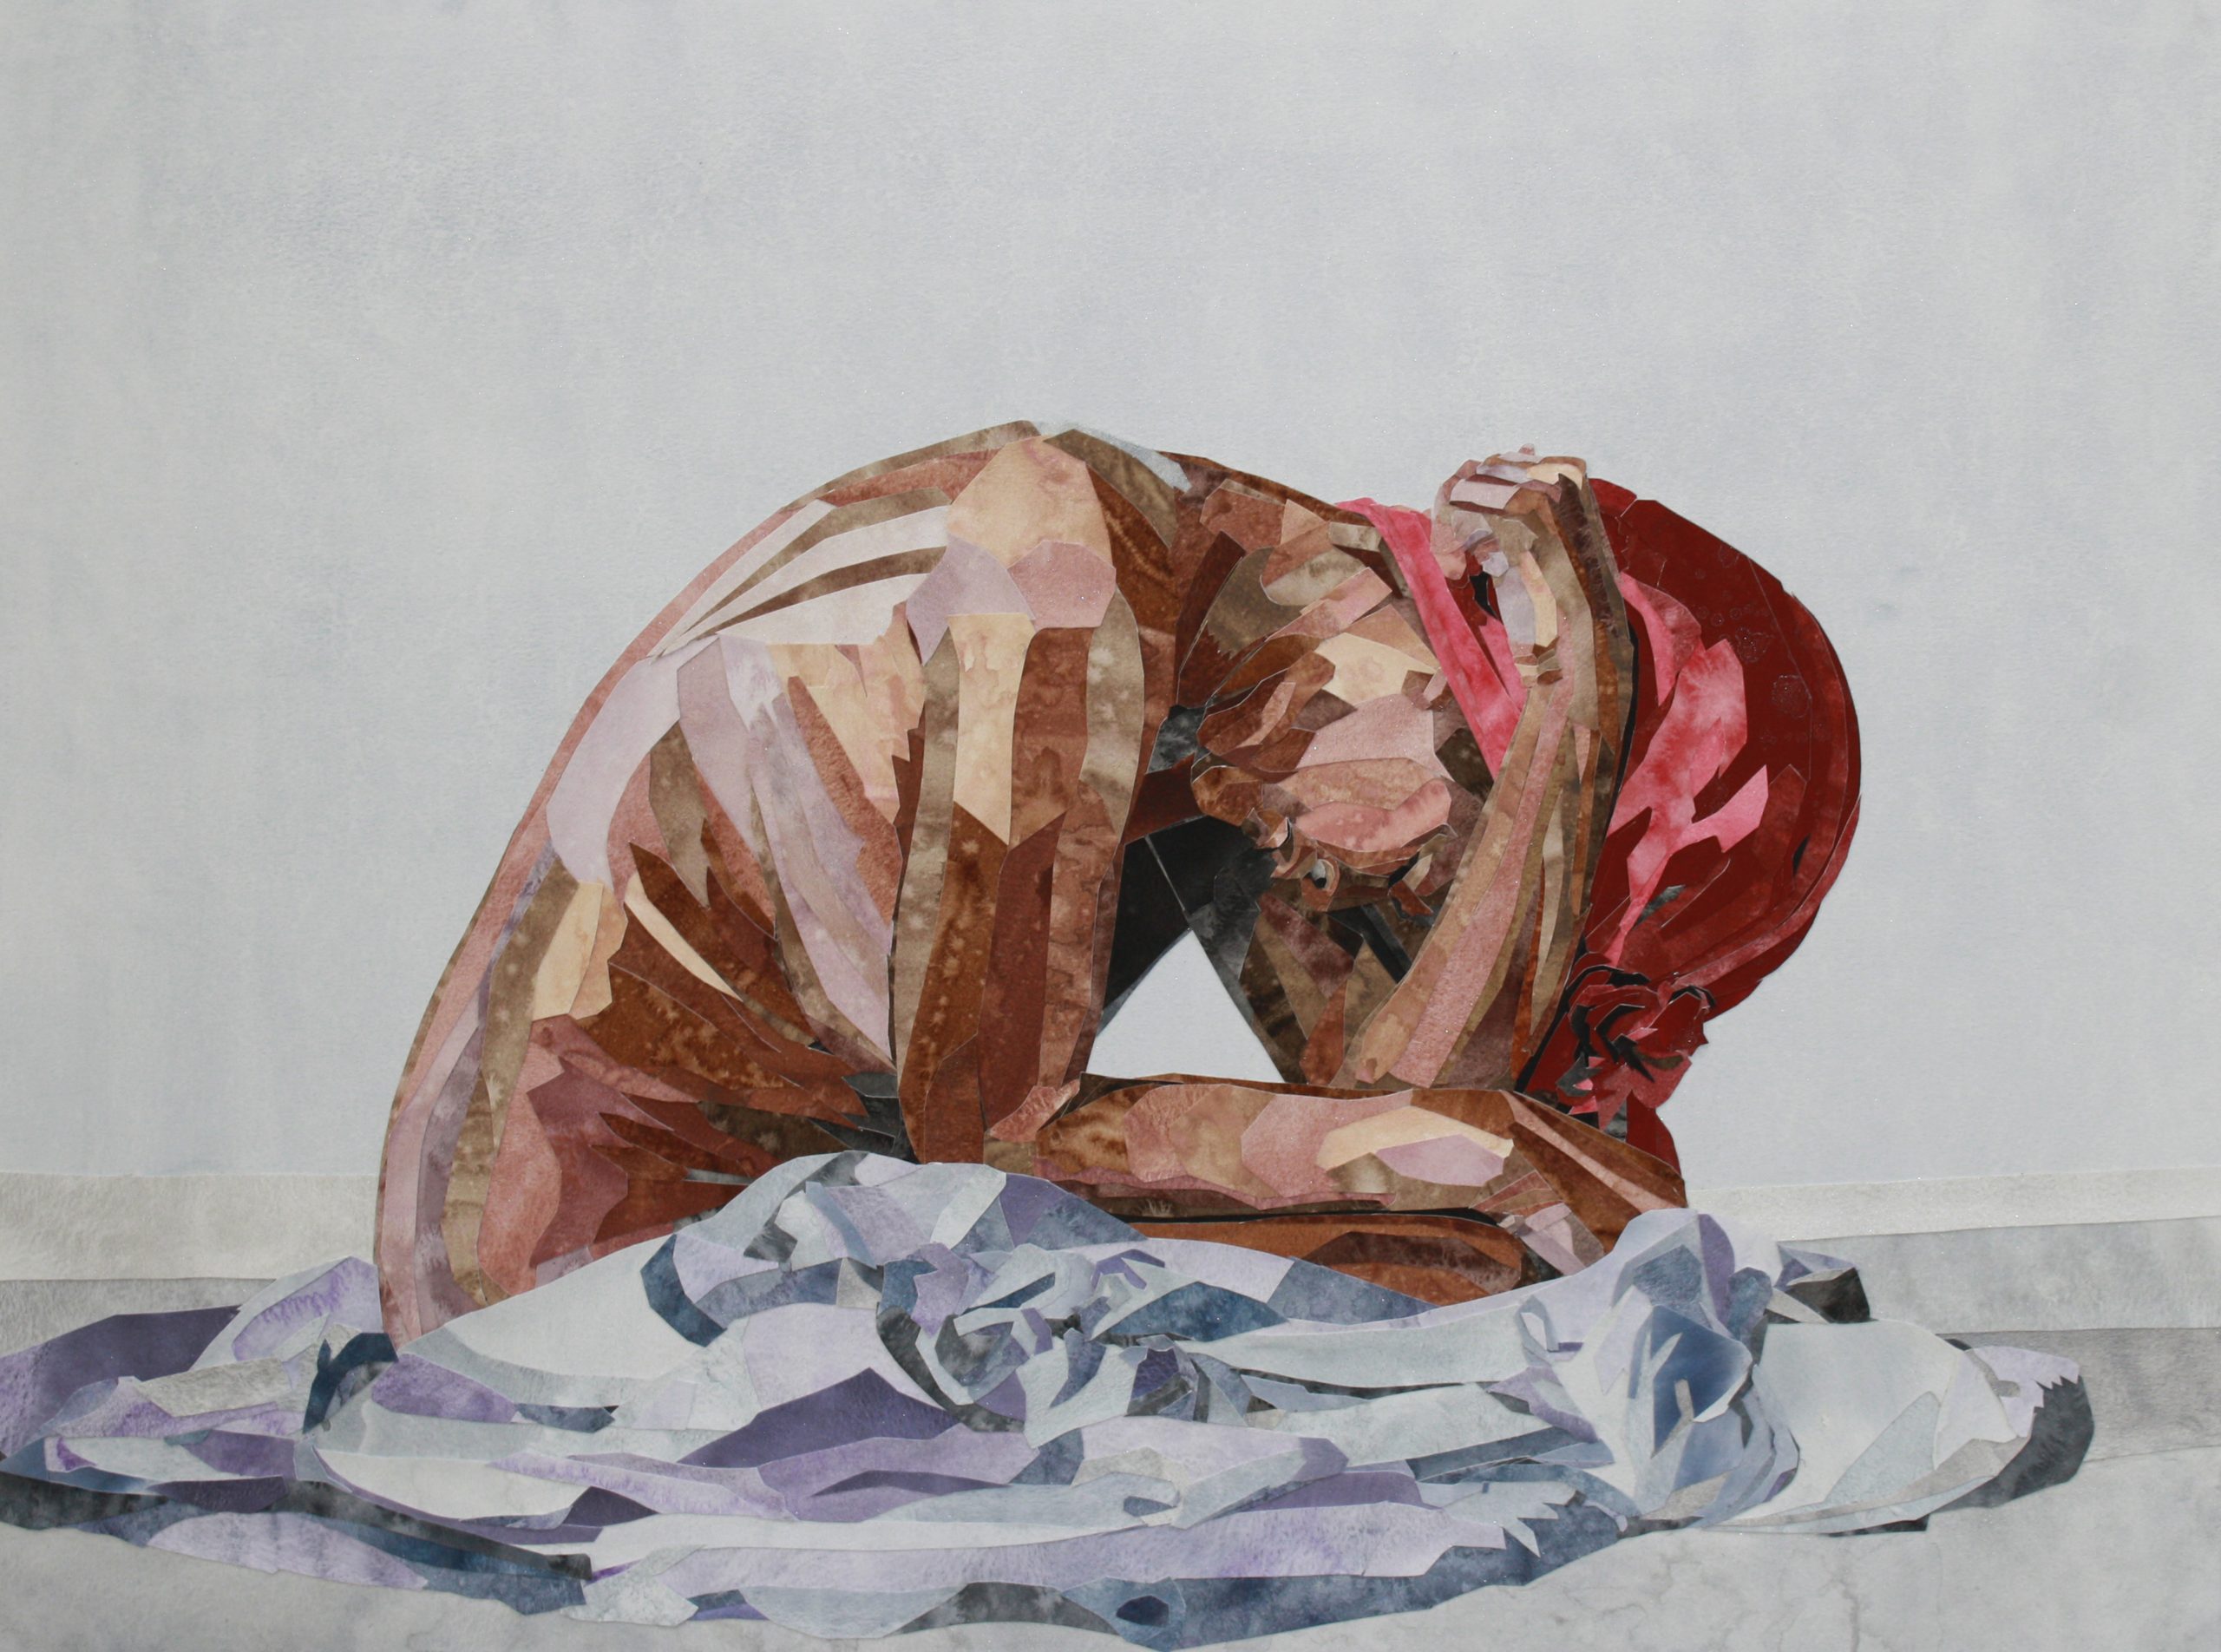 Image: Deep Water and Drowning Are Not The Same Thing by YoYo Lander, 2019. The mixed-media piece shows a nude woman with brown skin sitting with her head in her arms. She wears a red head wrap and sits on blue sheets. Image courtesy of the artist.